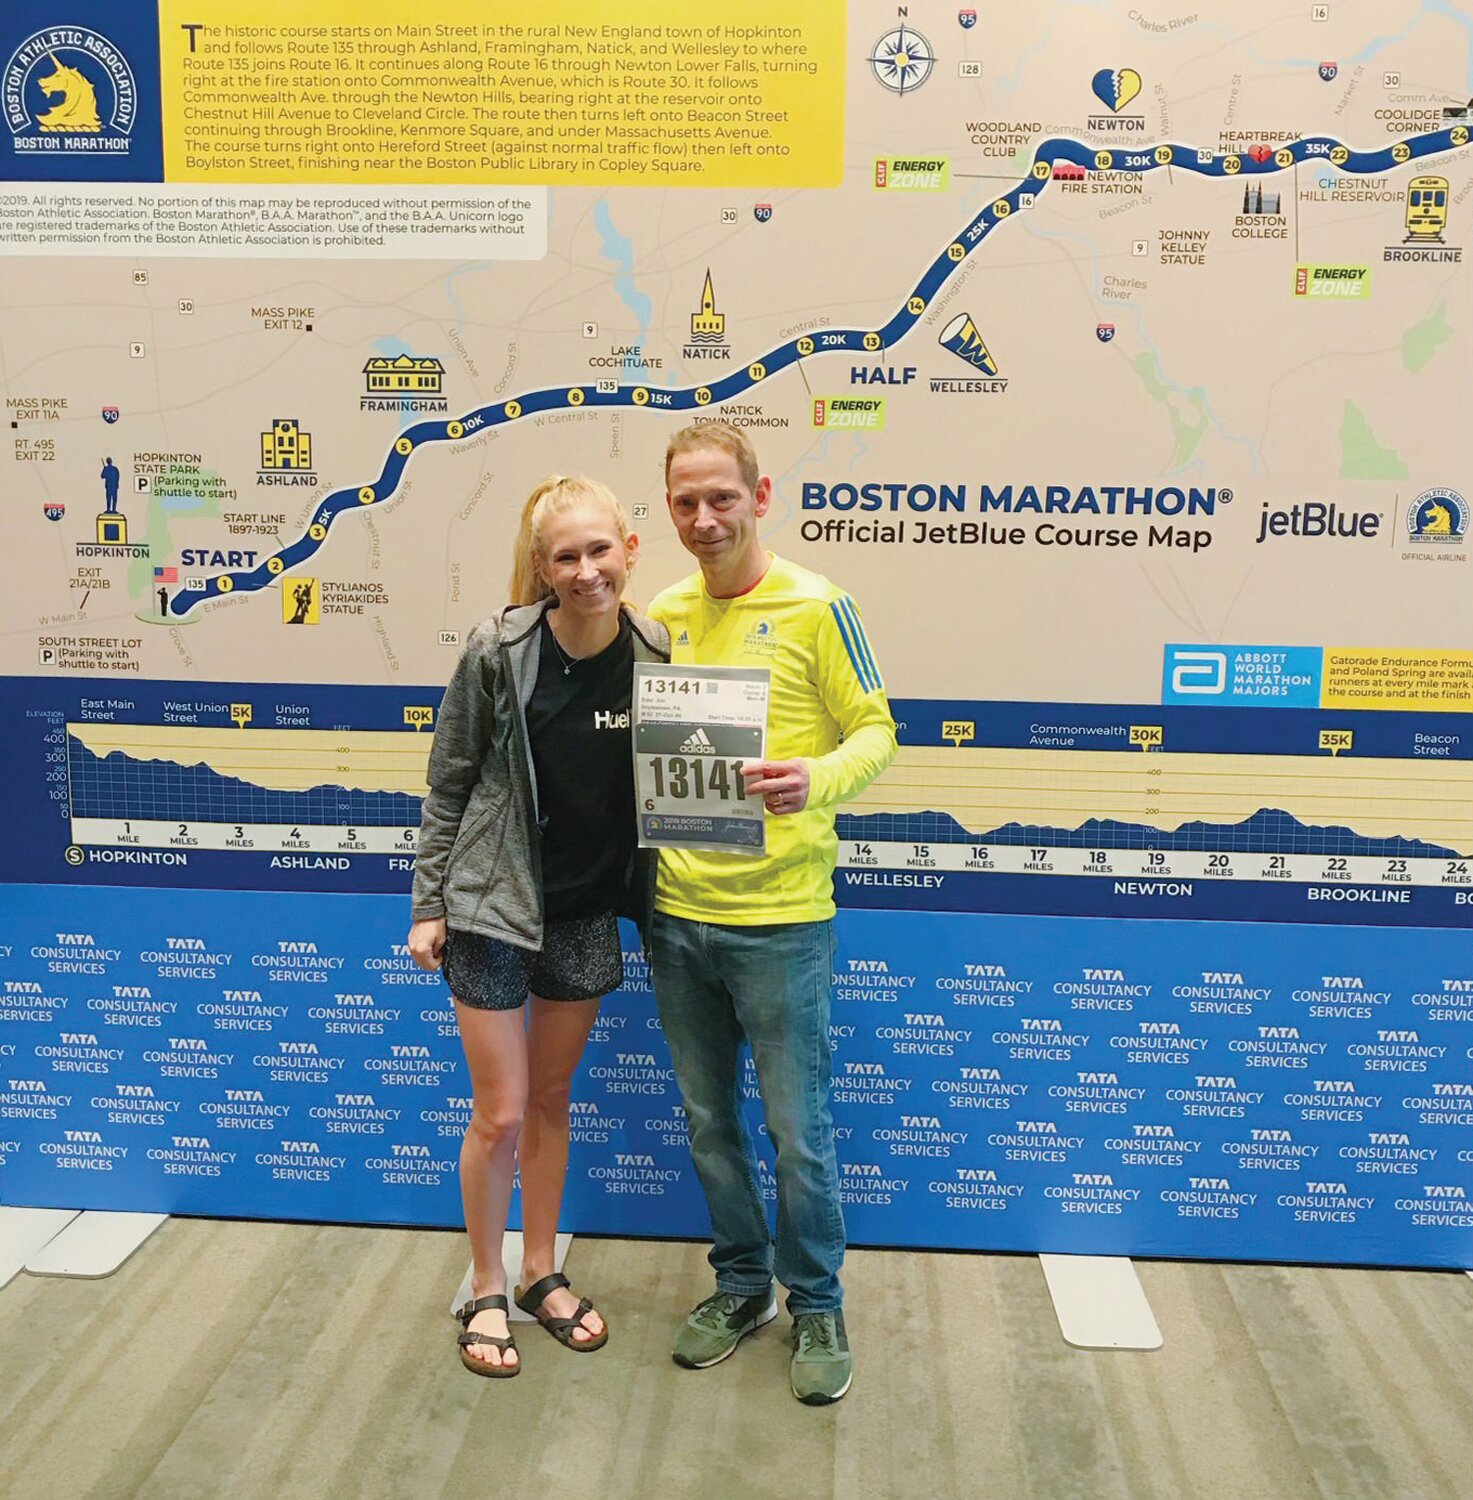 Proud daughter Veronica Eder stands next to her dad, Jim, after he completed the 2019 Boston Marathon in a time of 2:59 at age 52.